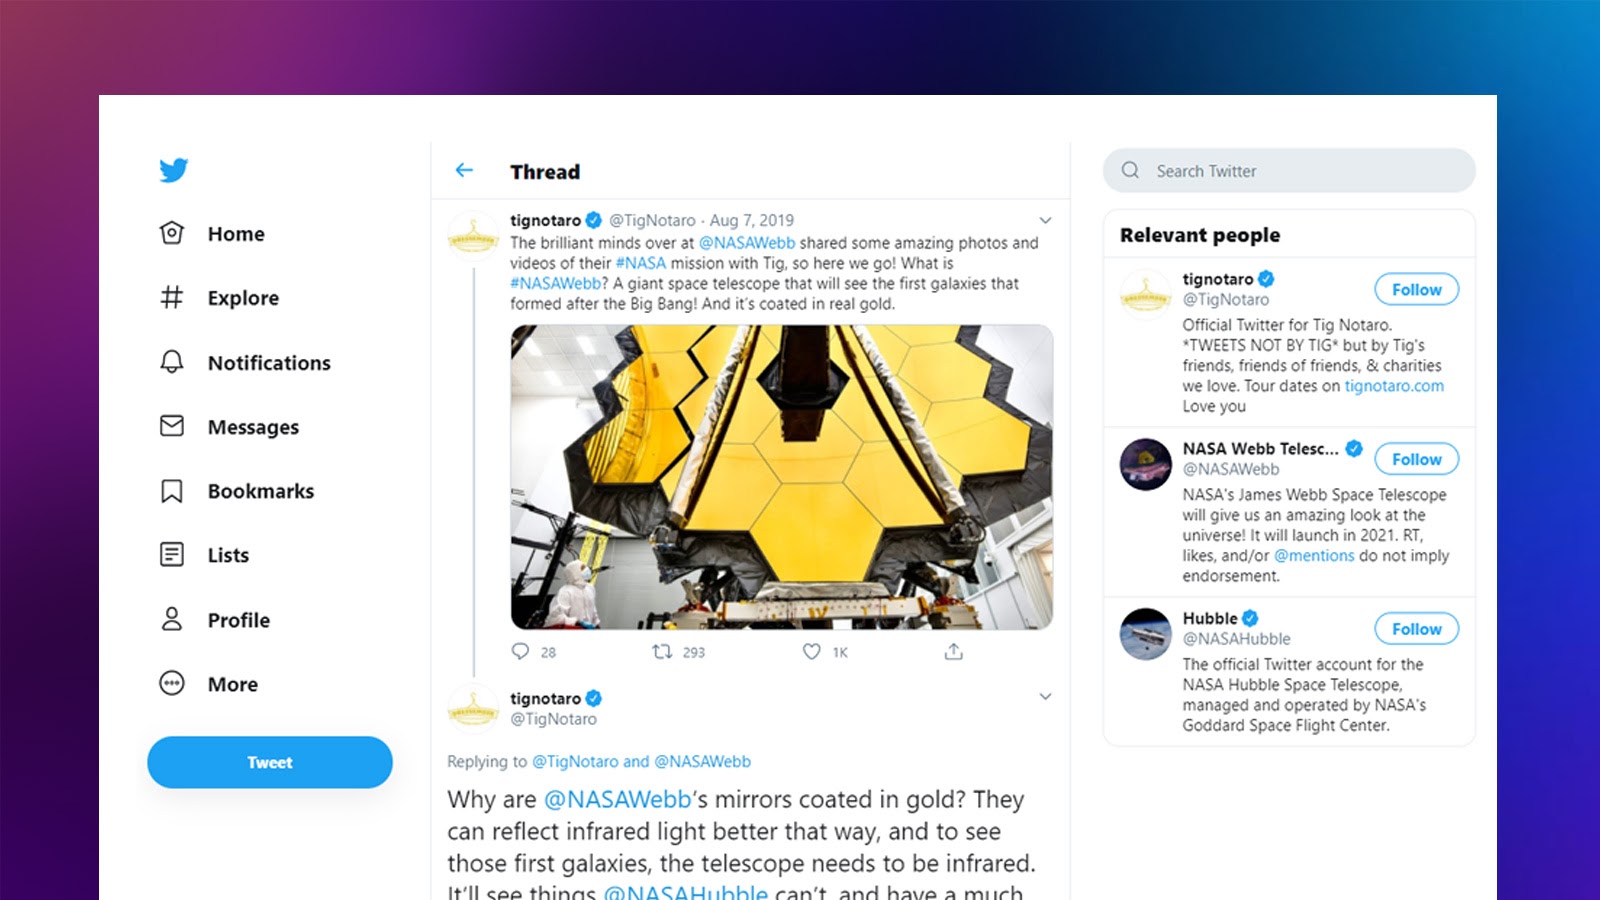 Jeff was behind the social campaign for the James Webb Space Telescope, using Tig Notaro’s Twitter feed to post updates.